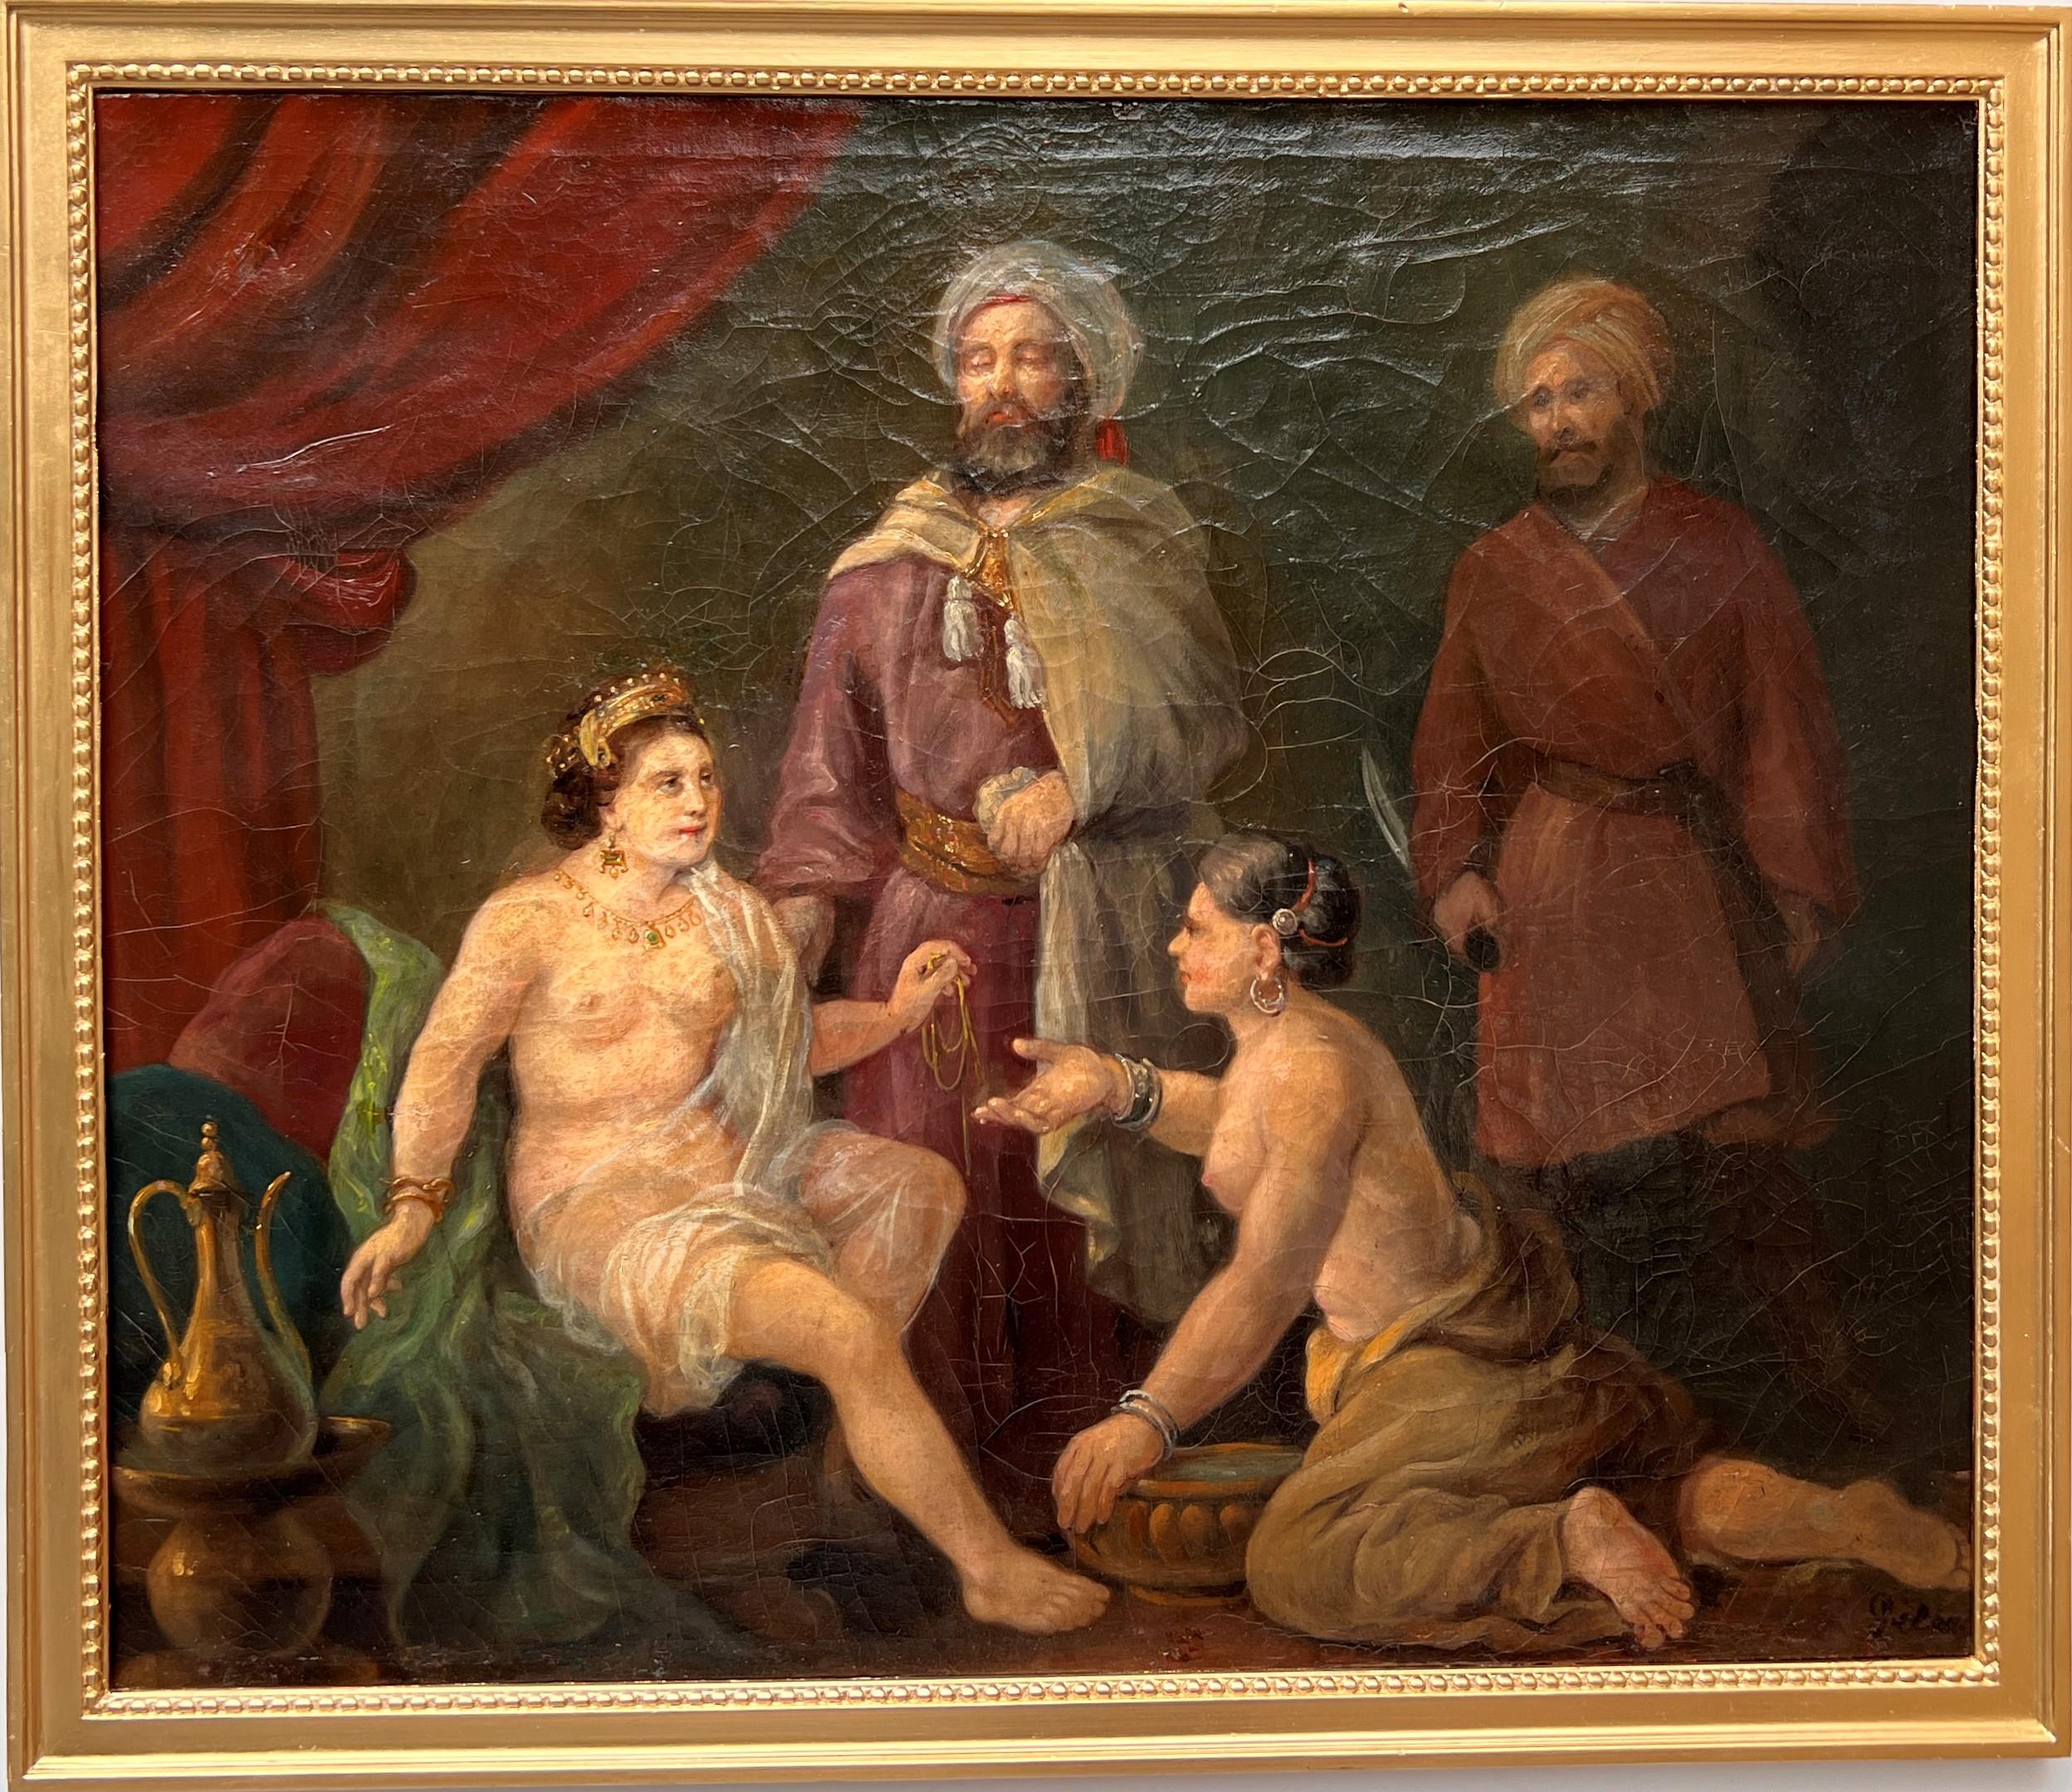 Unknown Figurative Painting - 19 cent or earlier Signed Antique Original Oil Painting on canvas, Genre Scene